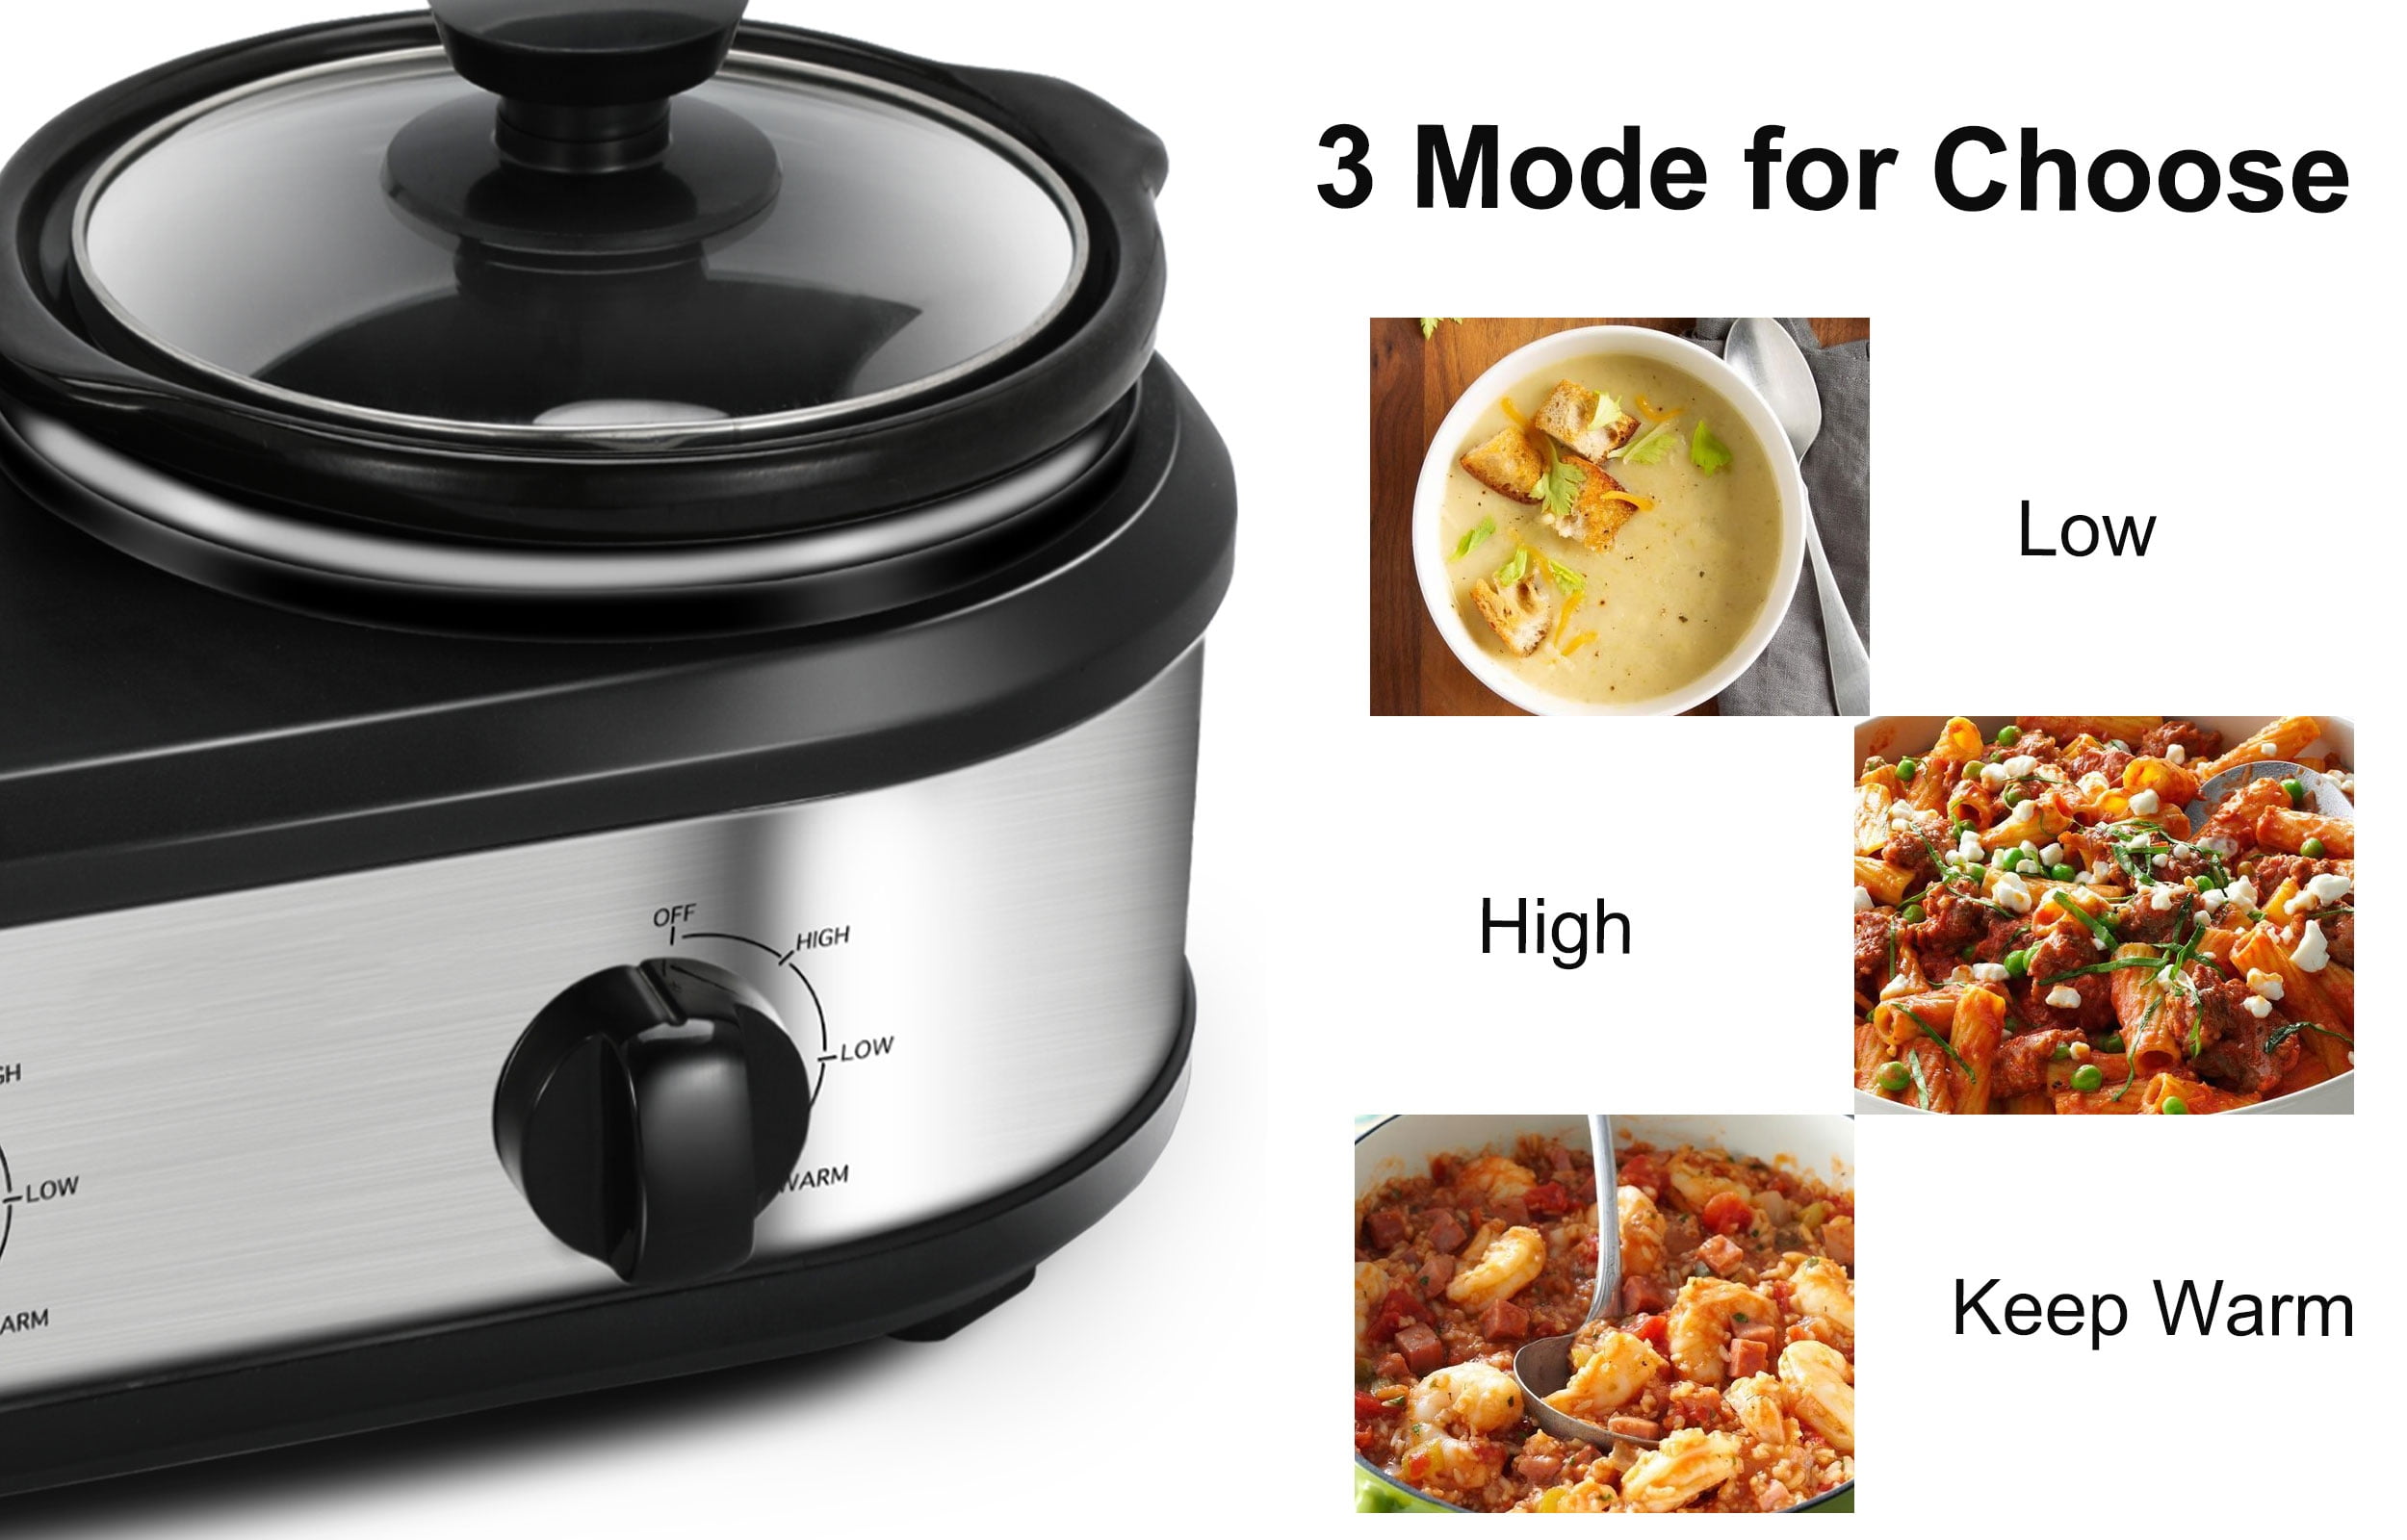 Small Double Slow Cooker, 2 Pot 1.25 Quart Oval Crock Food Warmer Buffet  Server, Stainless Steel